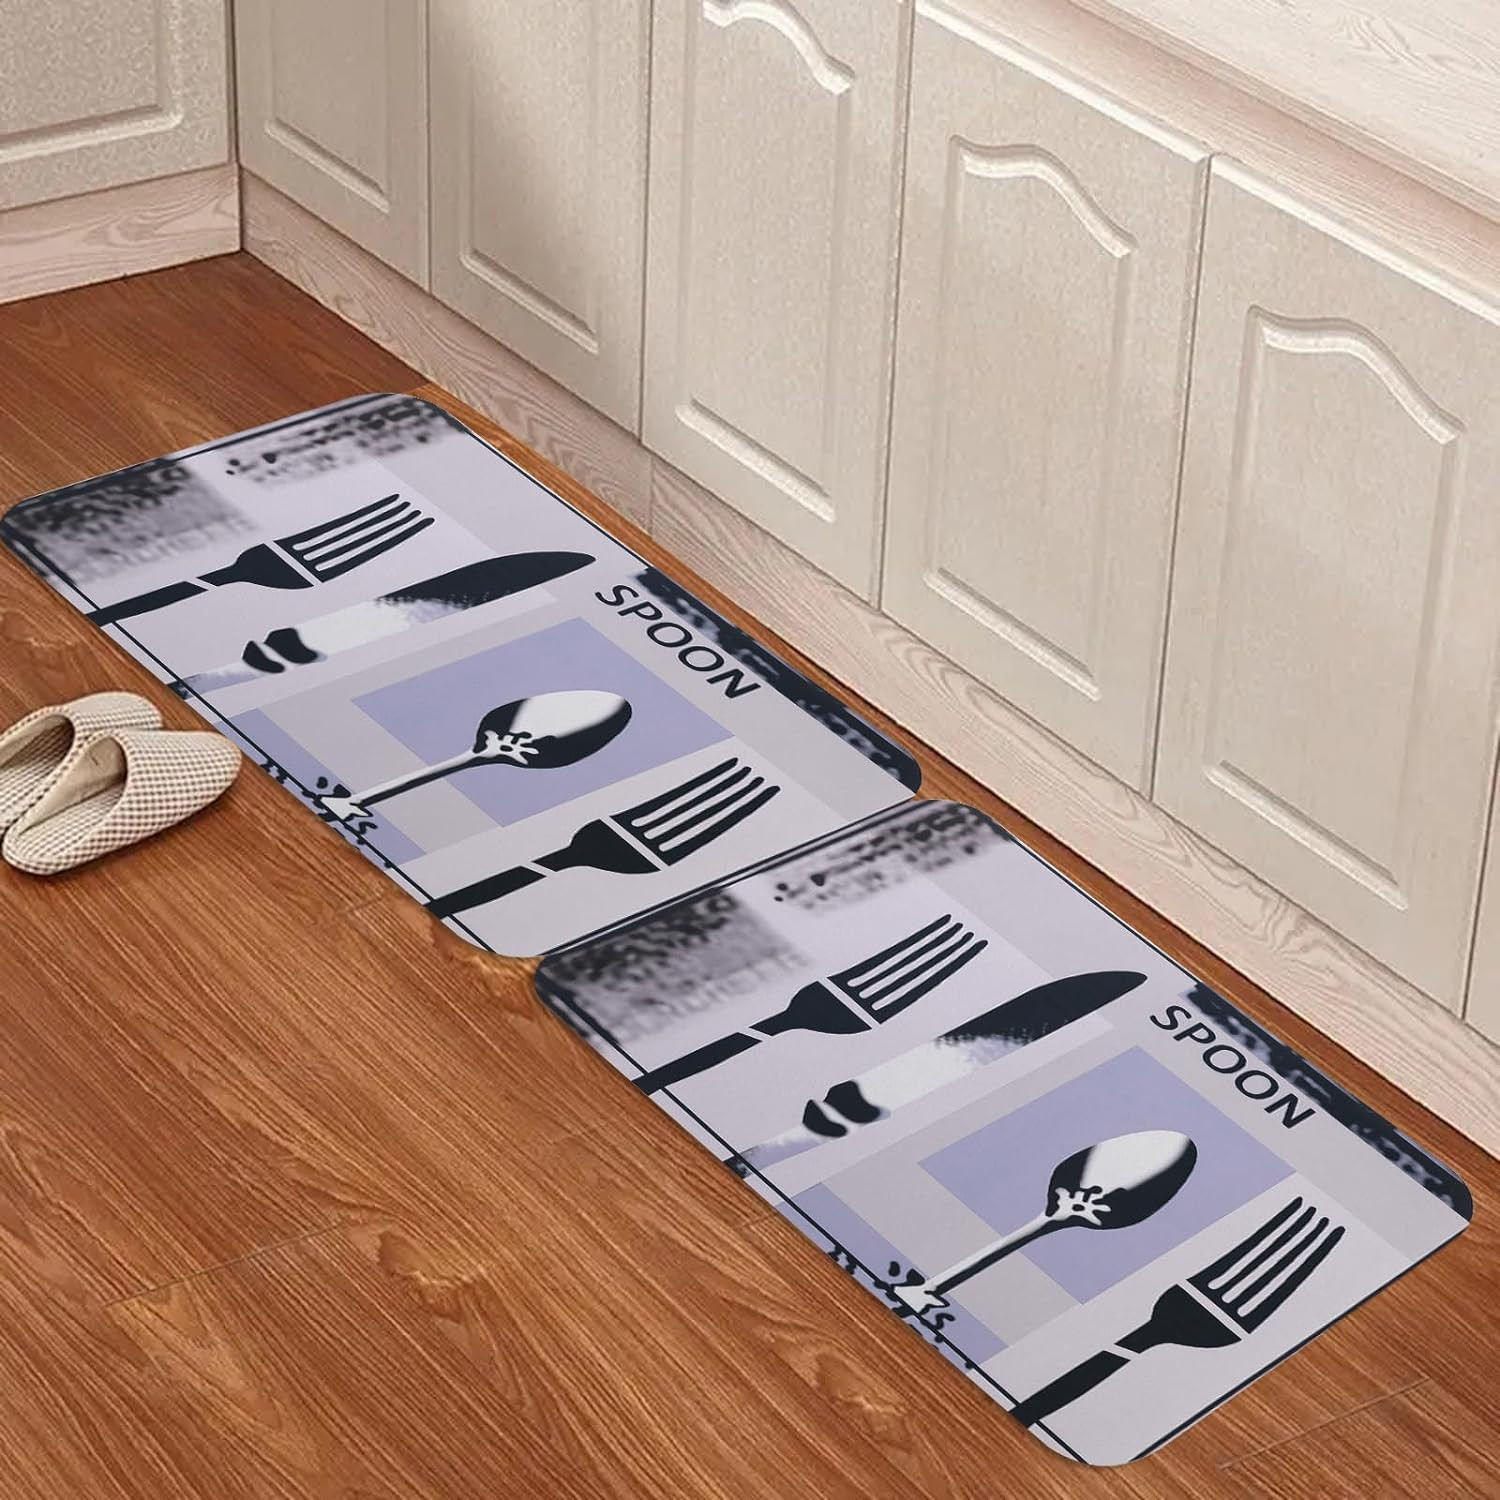 Kuber Industries PVC Kitchen Floor Mat|Anti-Skid Backing|Mats for Kitchen Floor |Easily Washable|Idol for Home, Kitchen Entrance| CF-220812 | Multi